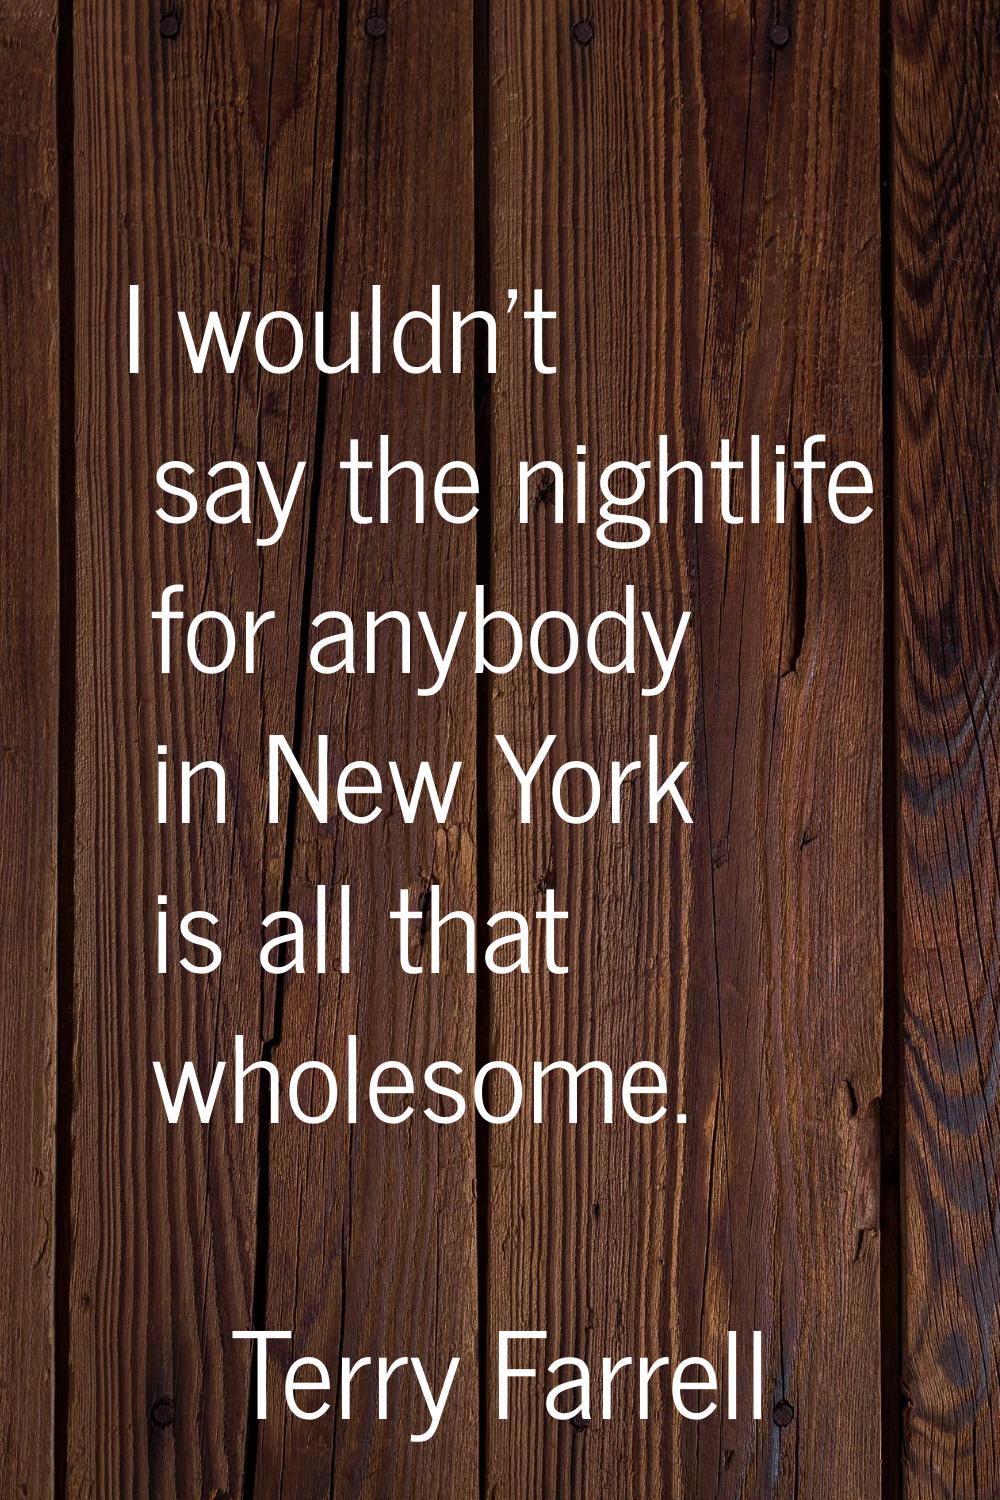 I wouldn't say the nightlife for anybody in New York is all that wholesome.